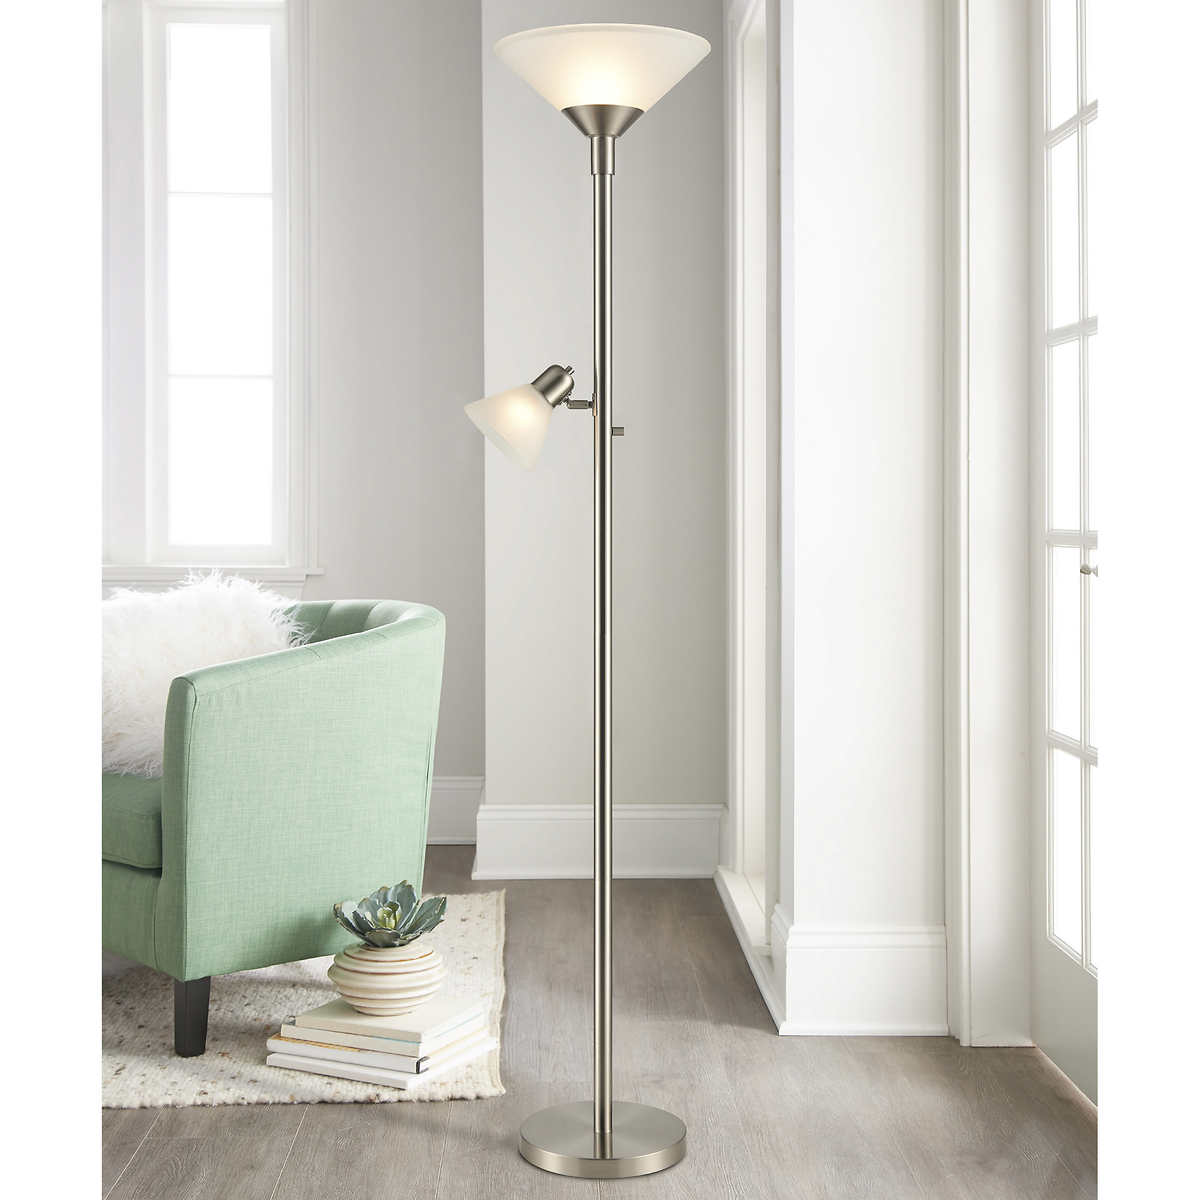 Torchiere Floor Lamp With Reading Light, Small Floor Lamps For Reading